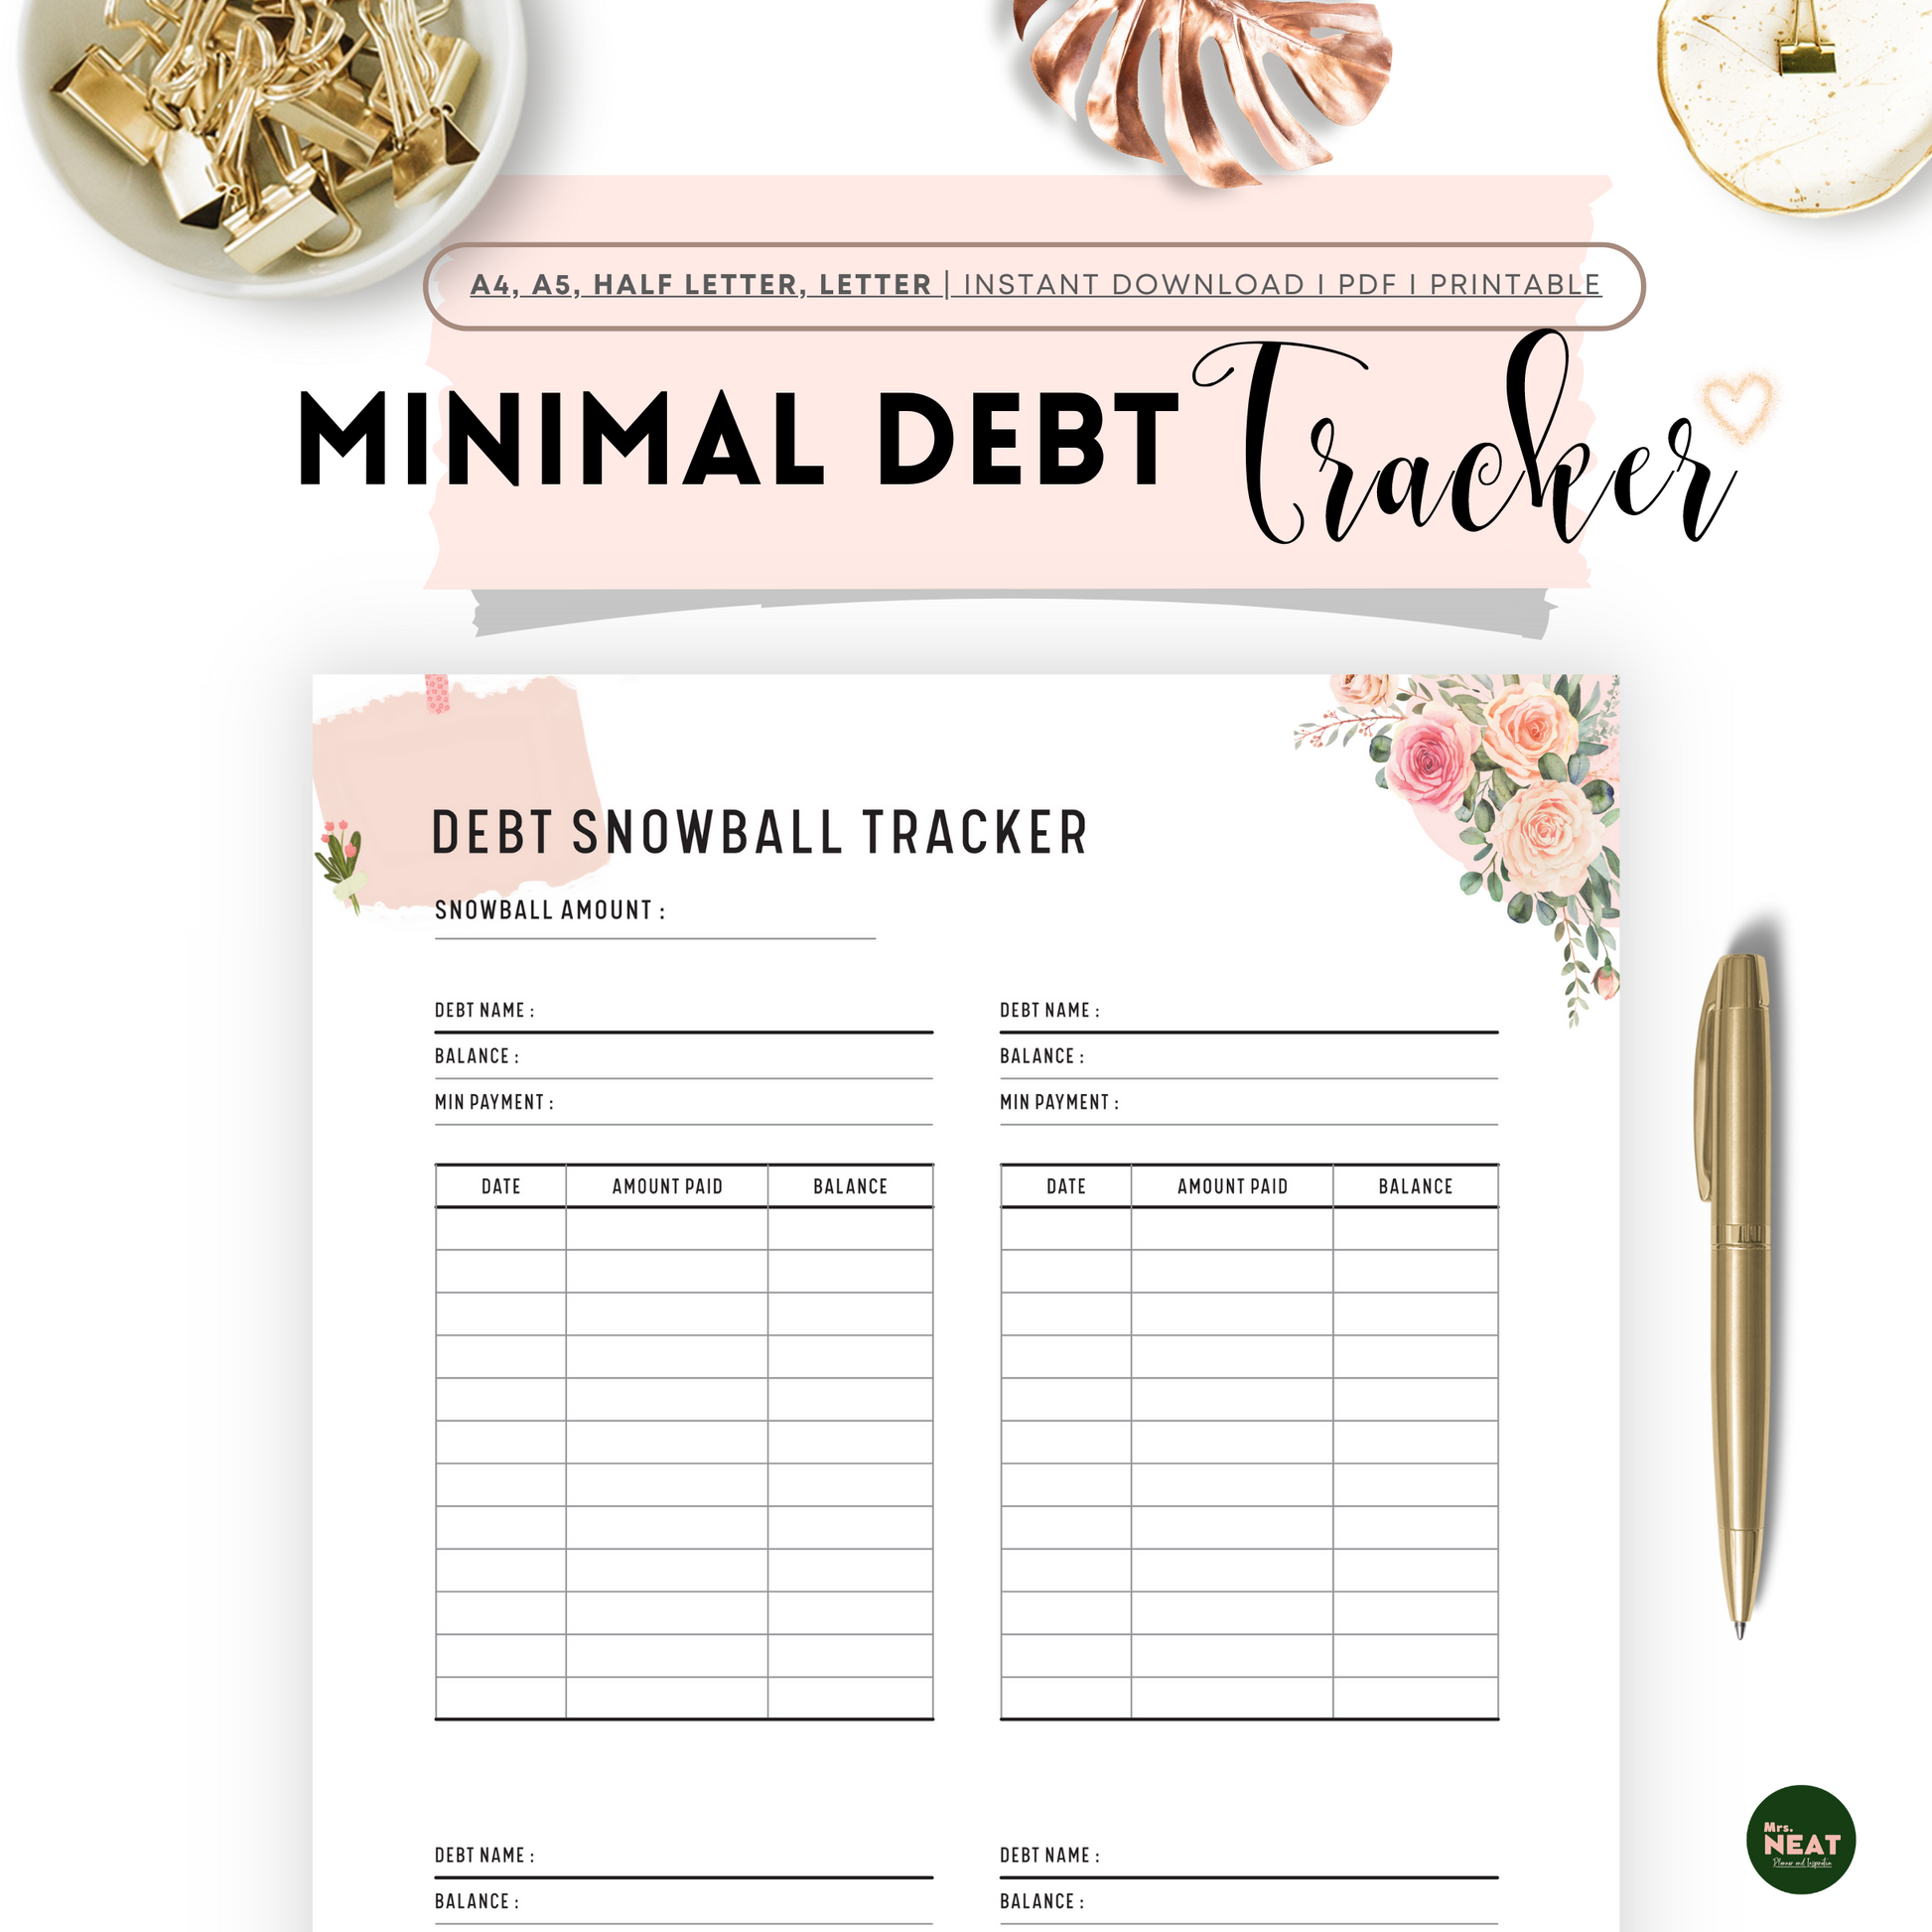 Cute and Beautiful Floral Debt Snowball Tracker in Minimalist Design